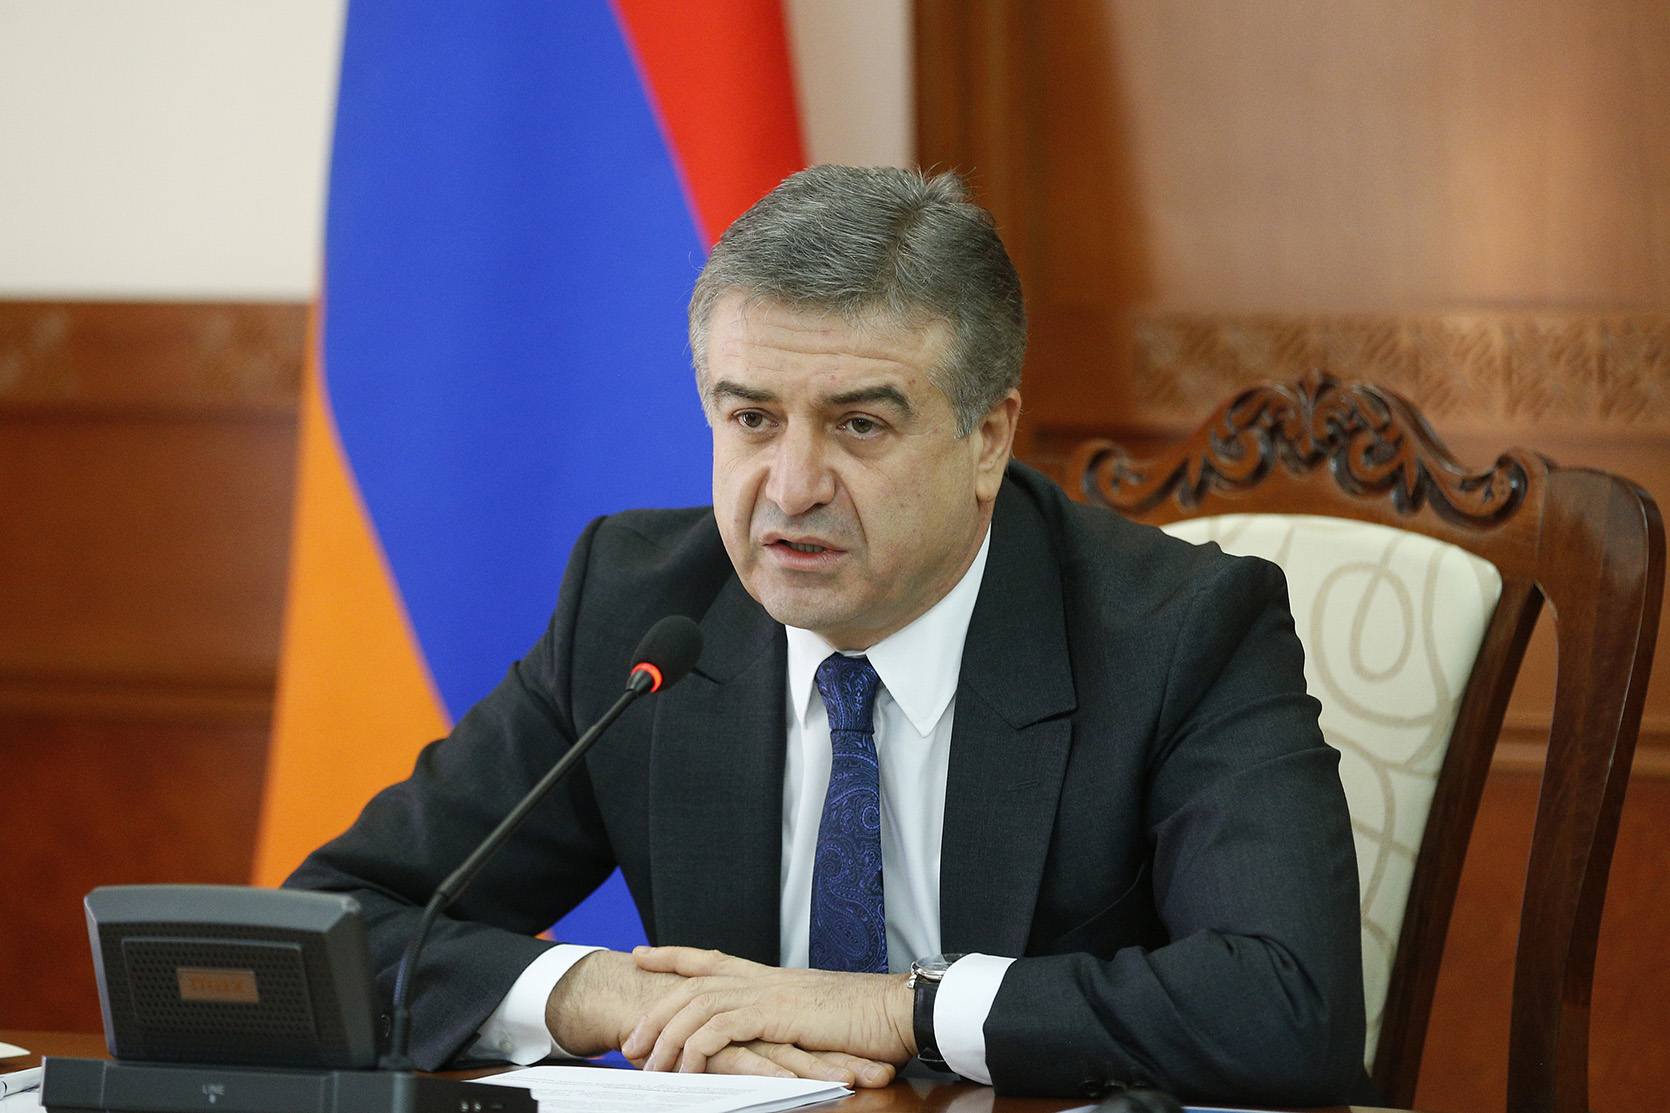 Karen Karapetyan: Prime Minister can only be elected in Parliament through constitutional way